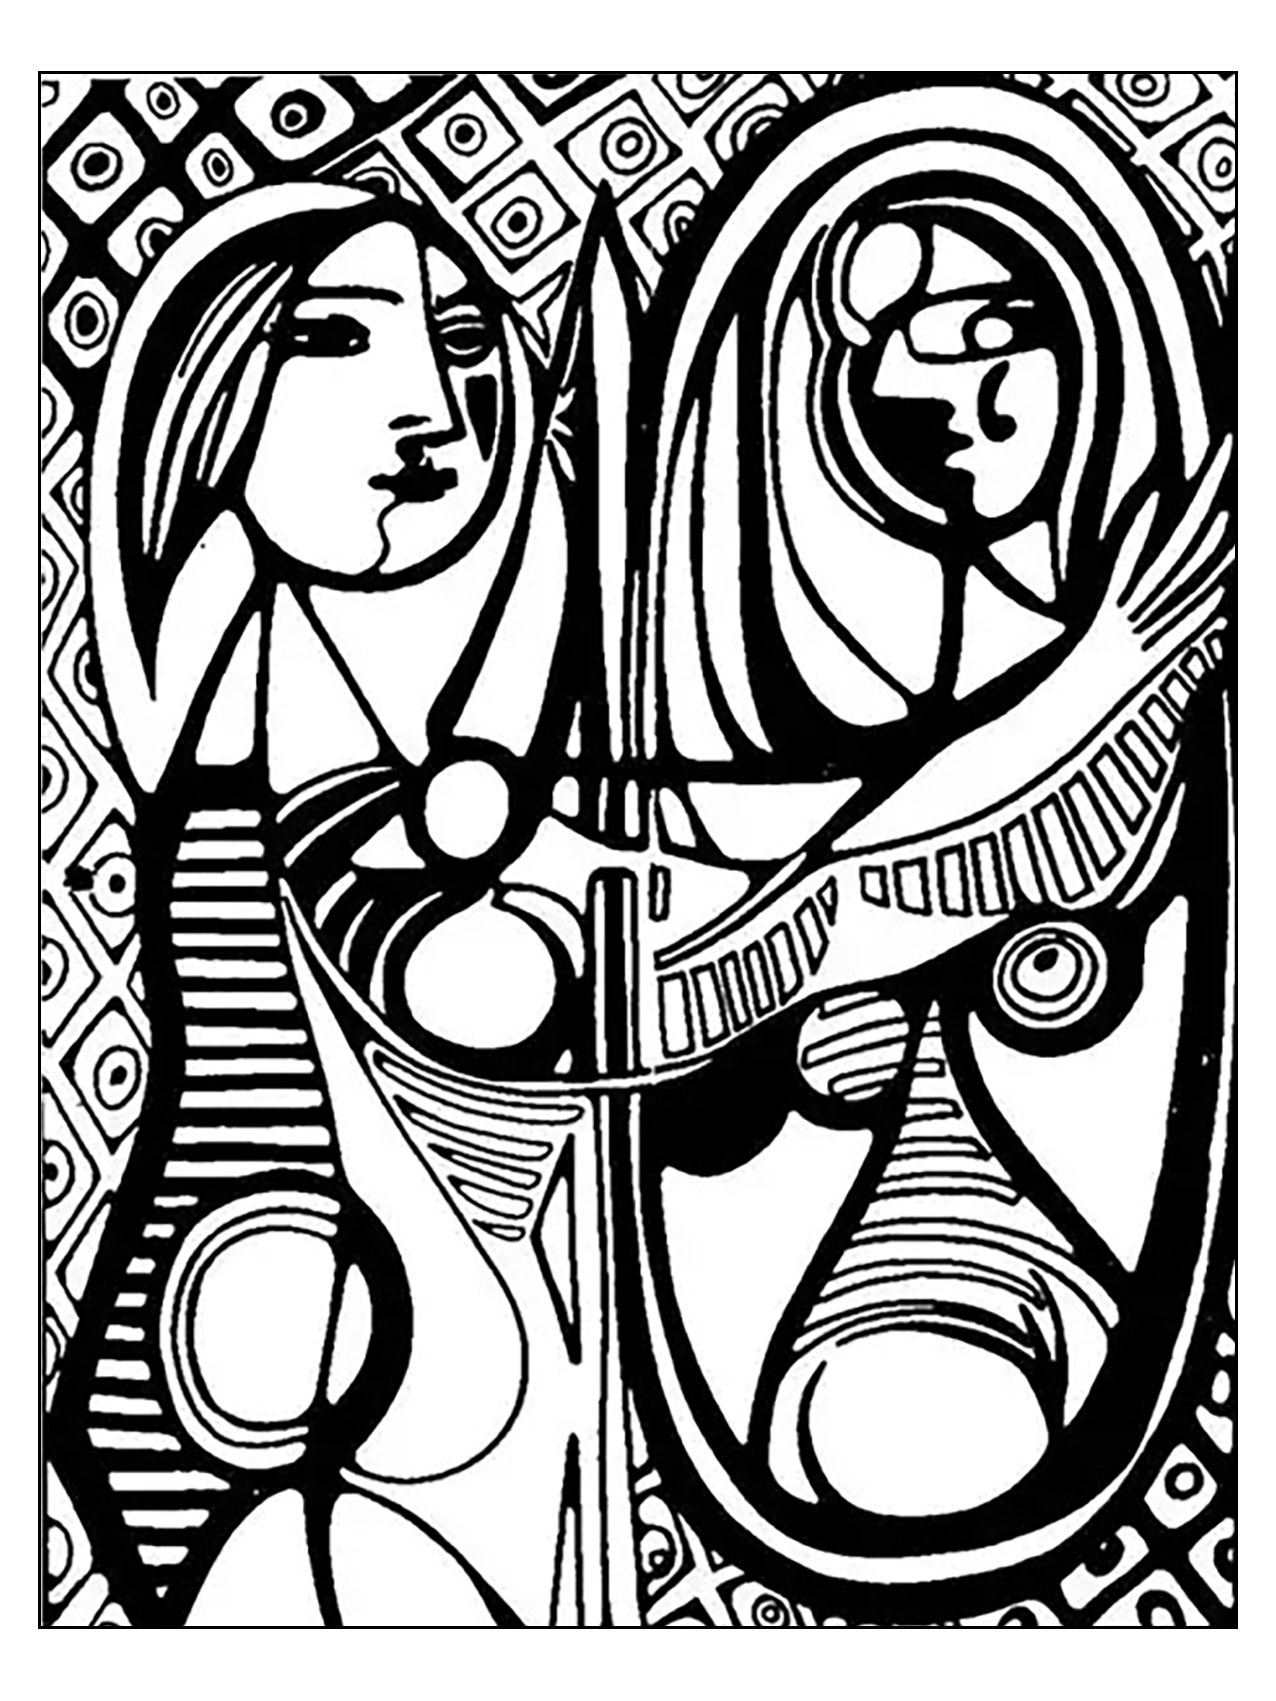 Coloring page inspired by 'Girl before a mirror' by Picasso (1932)